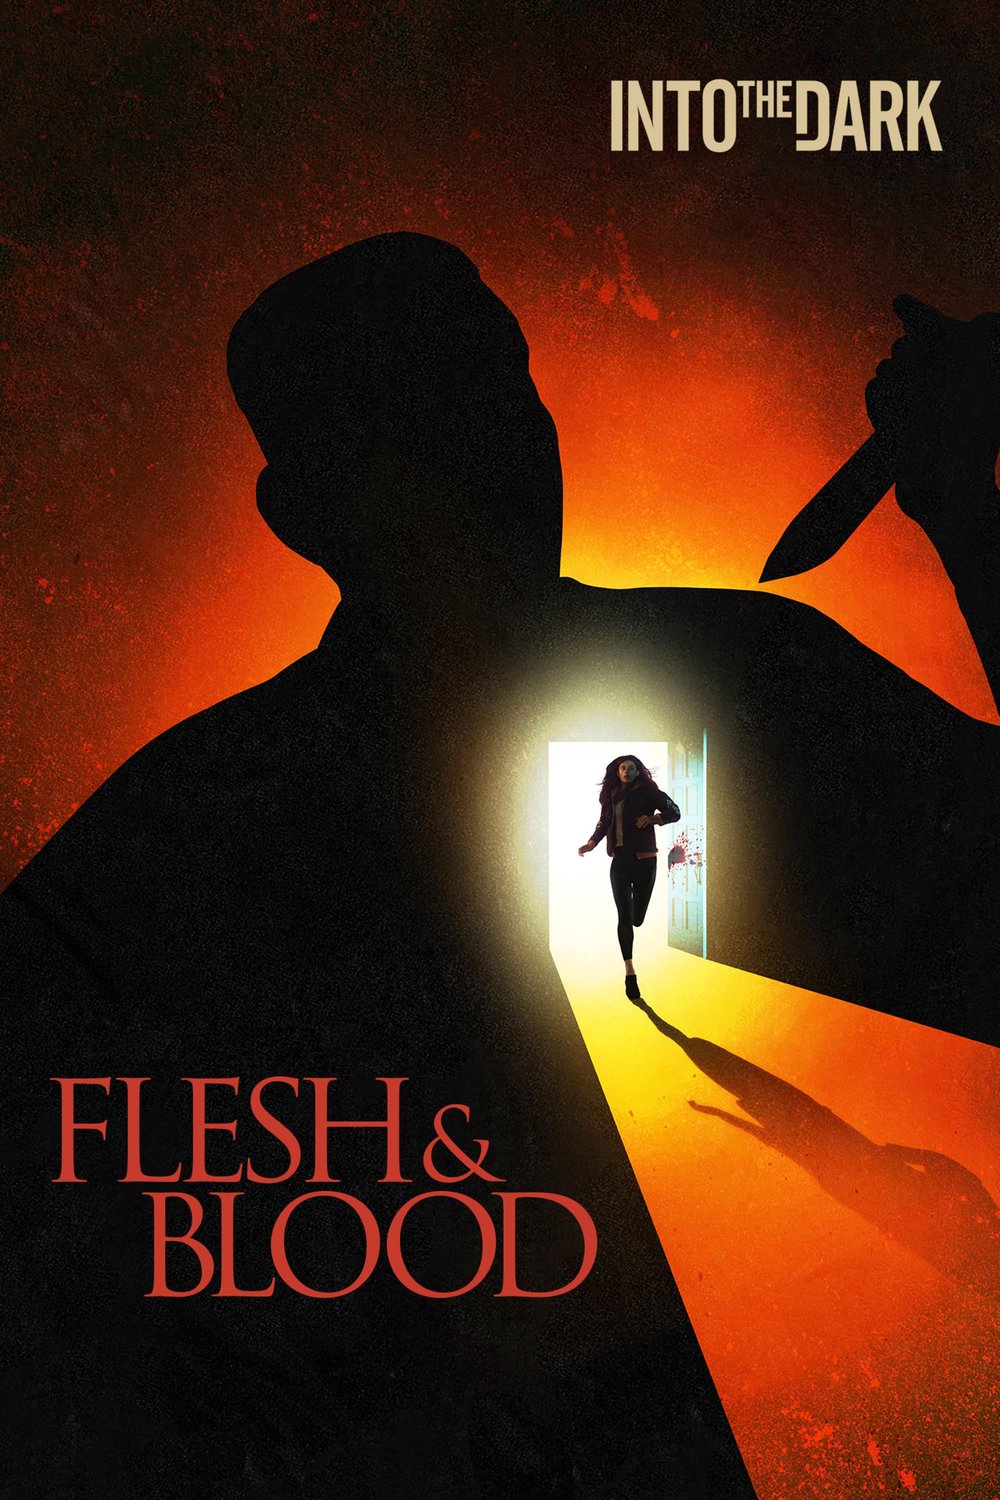 Poster of the movie Flesh & Blood